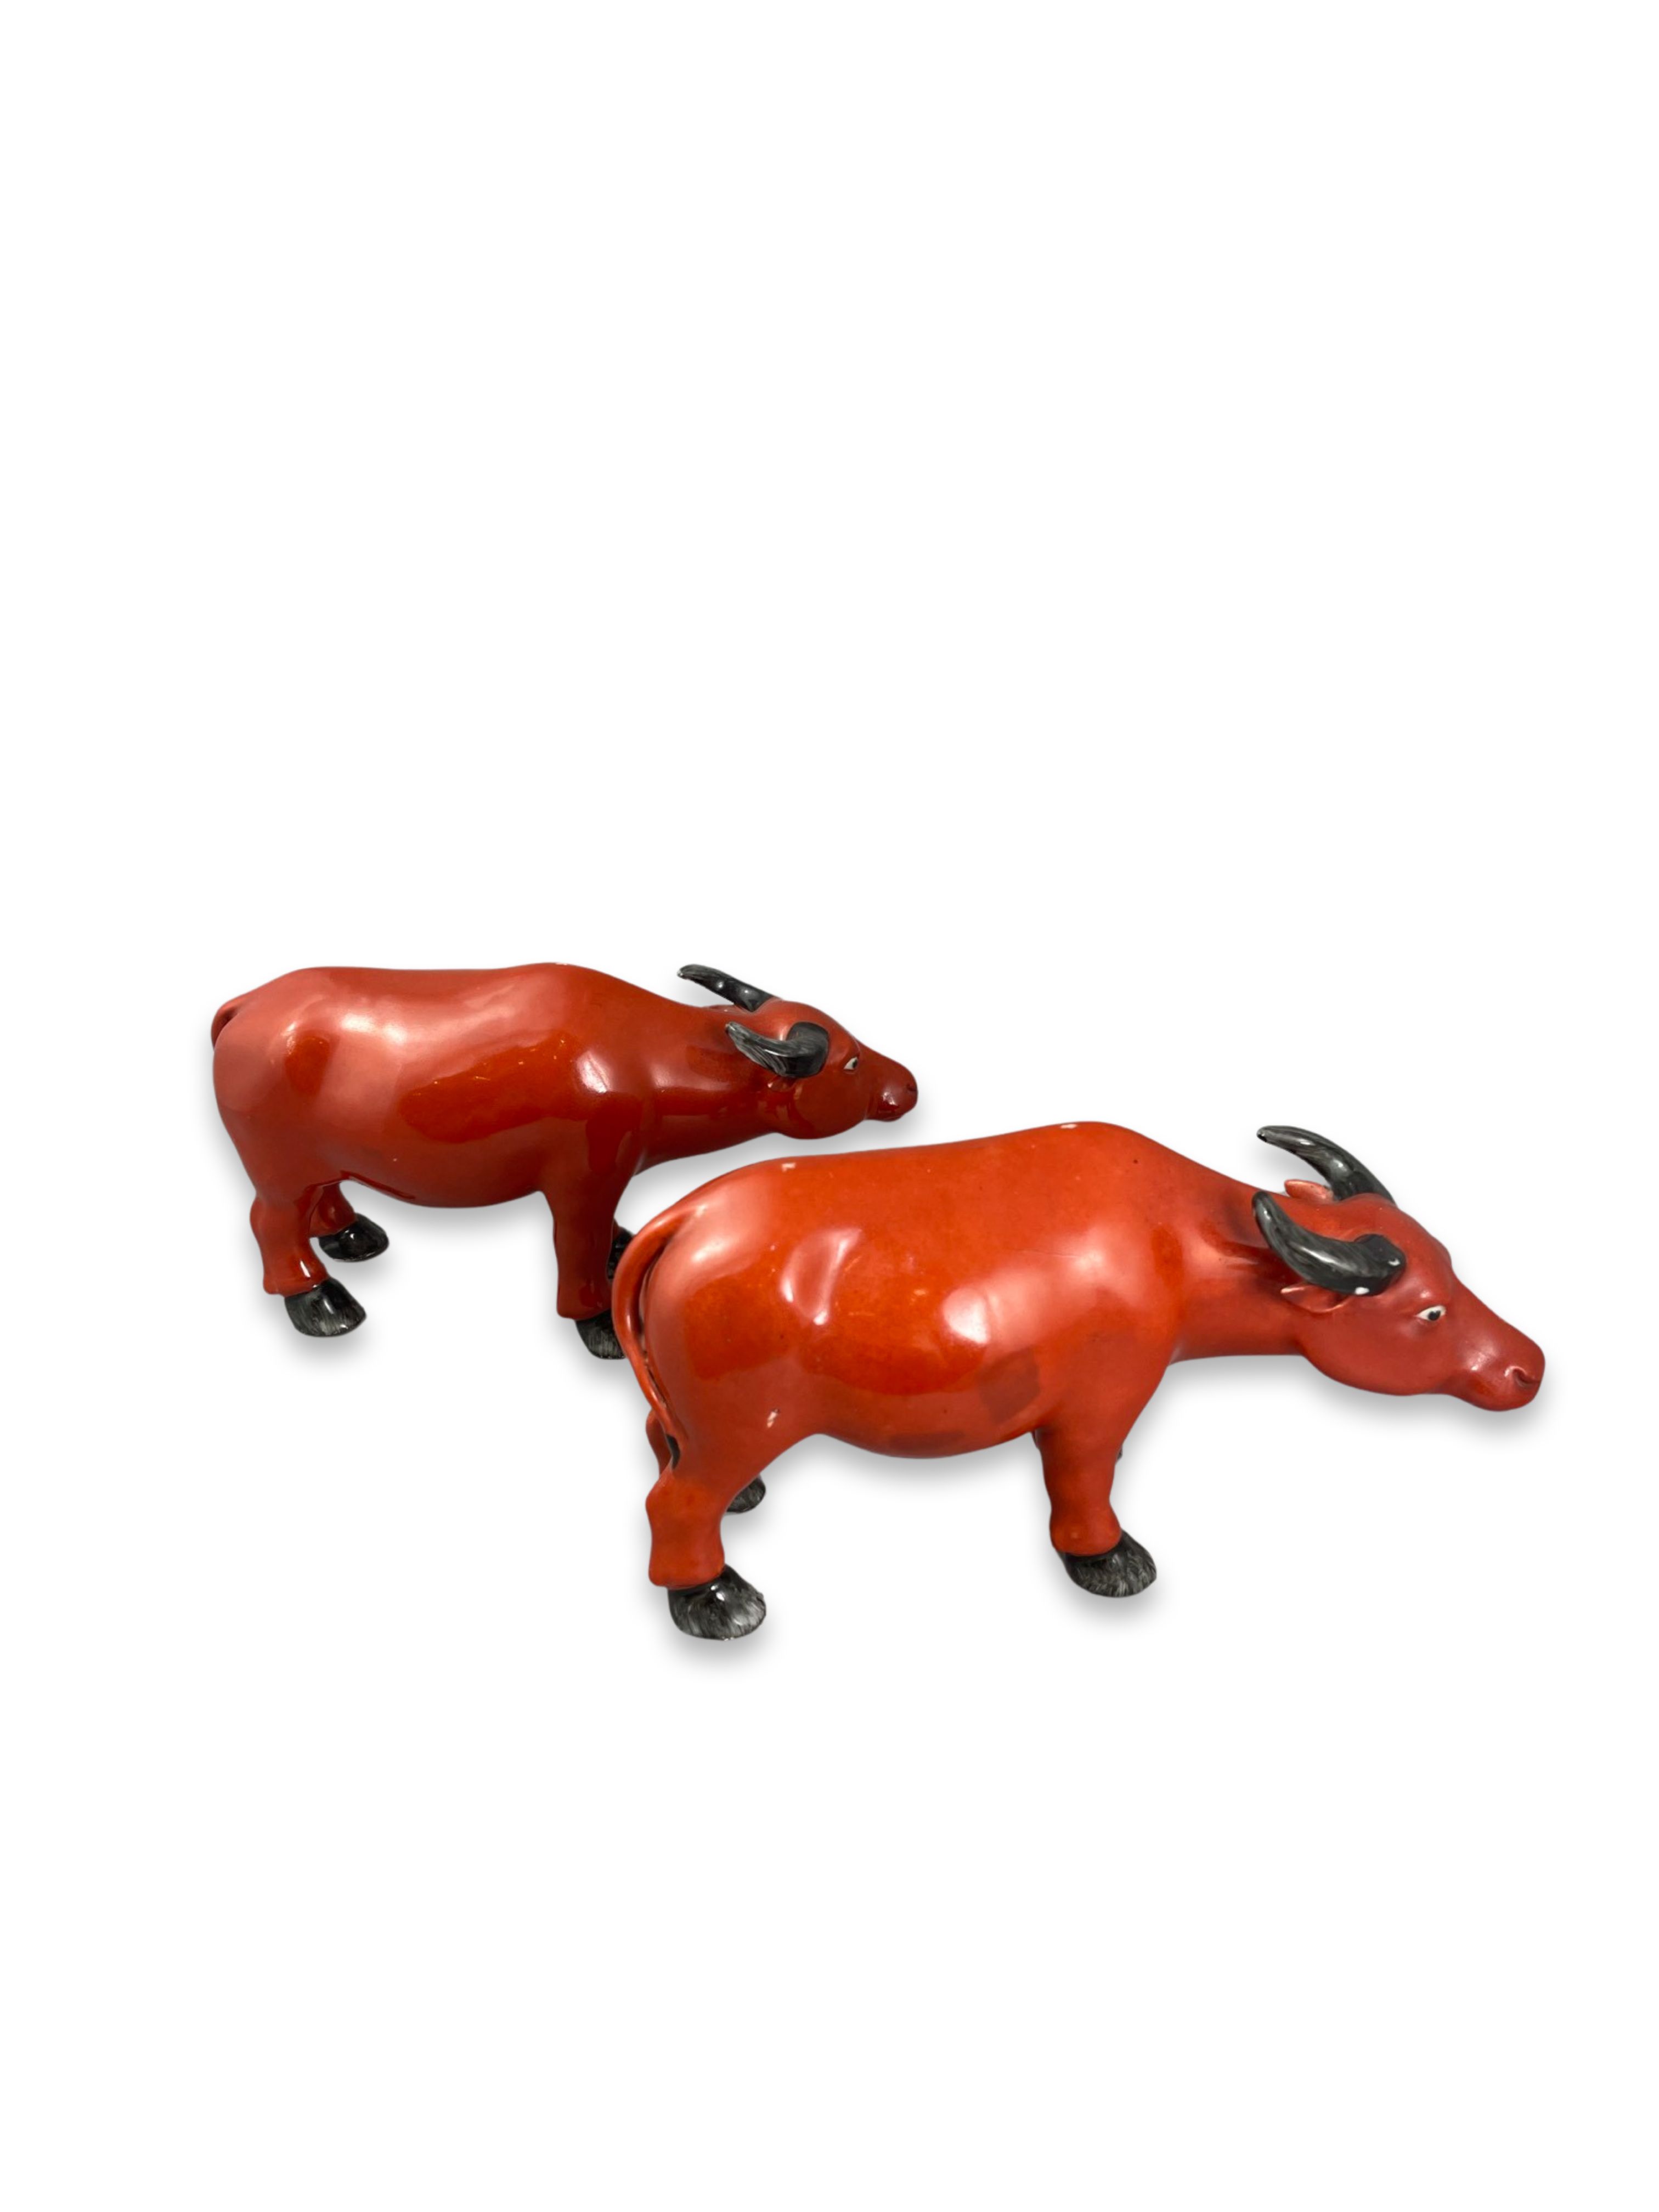 A Pair of Iron Red Buffalo, 19/20th century - Image 5 of 6